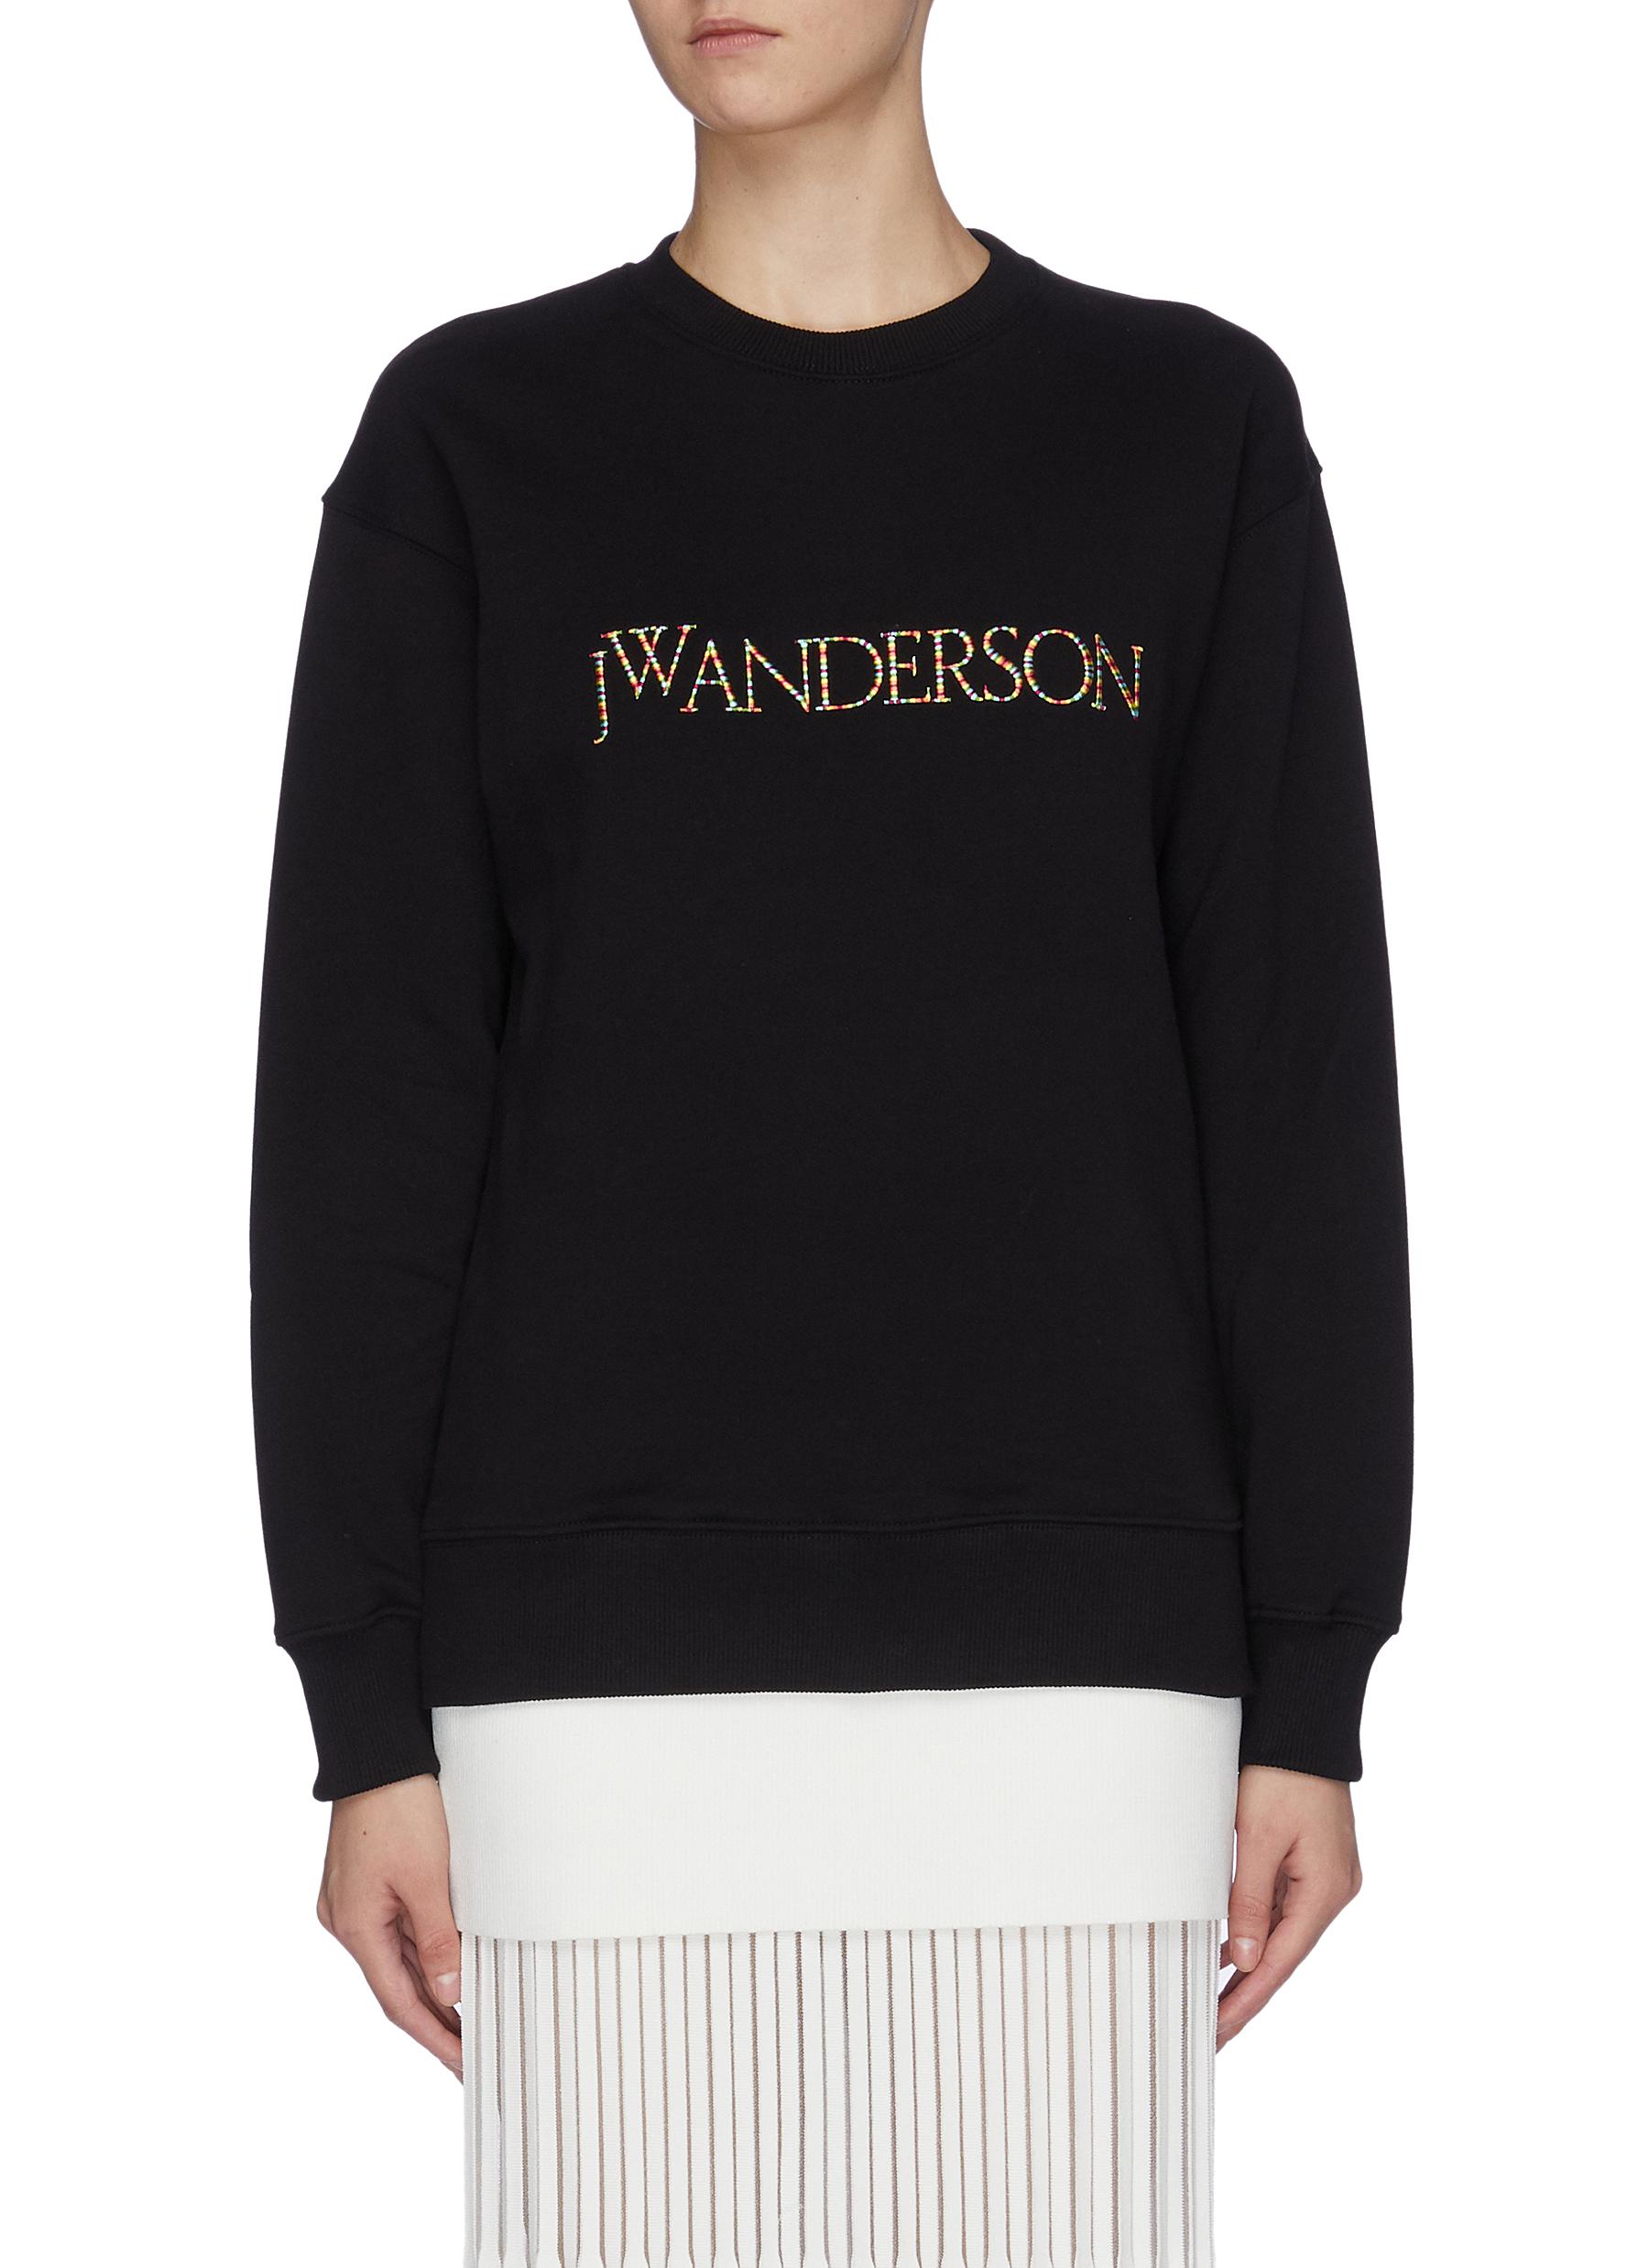 Logo embroidered sweatshirt by Jw Anderson